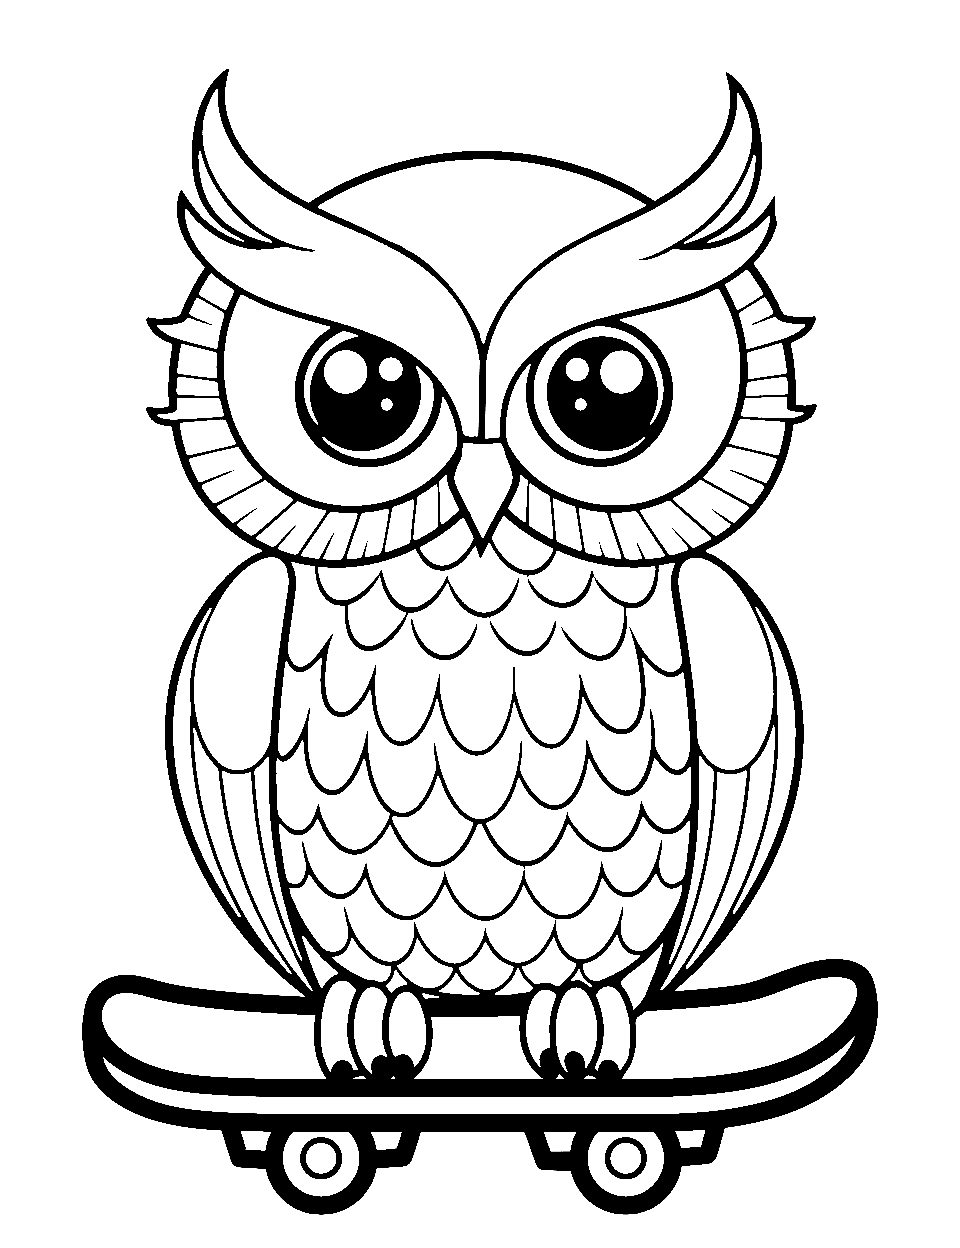 Skater Owl Coloring Page - A sporty owl riding a skateboard.